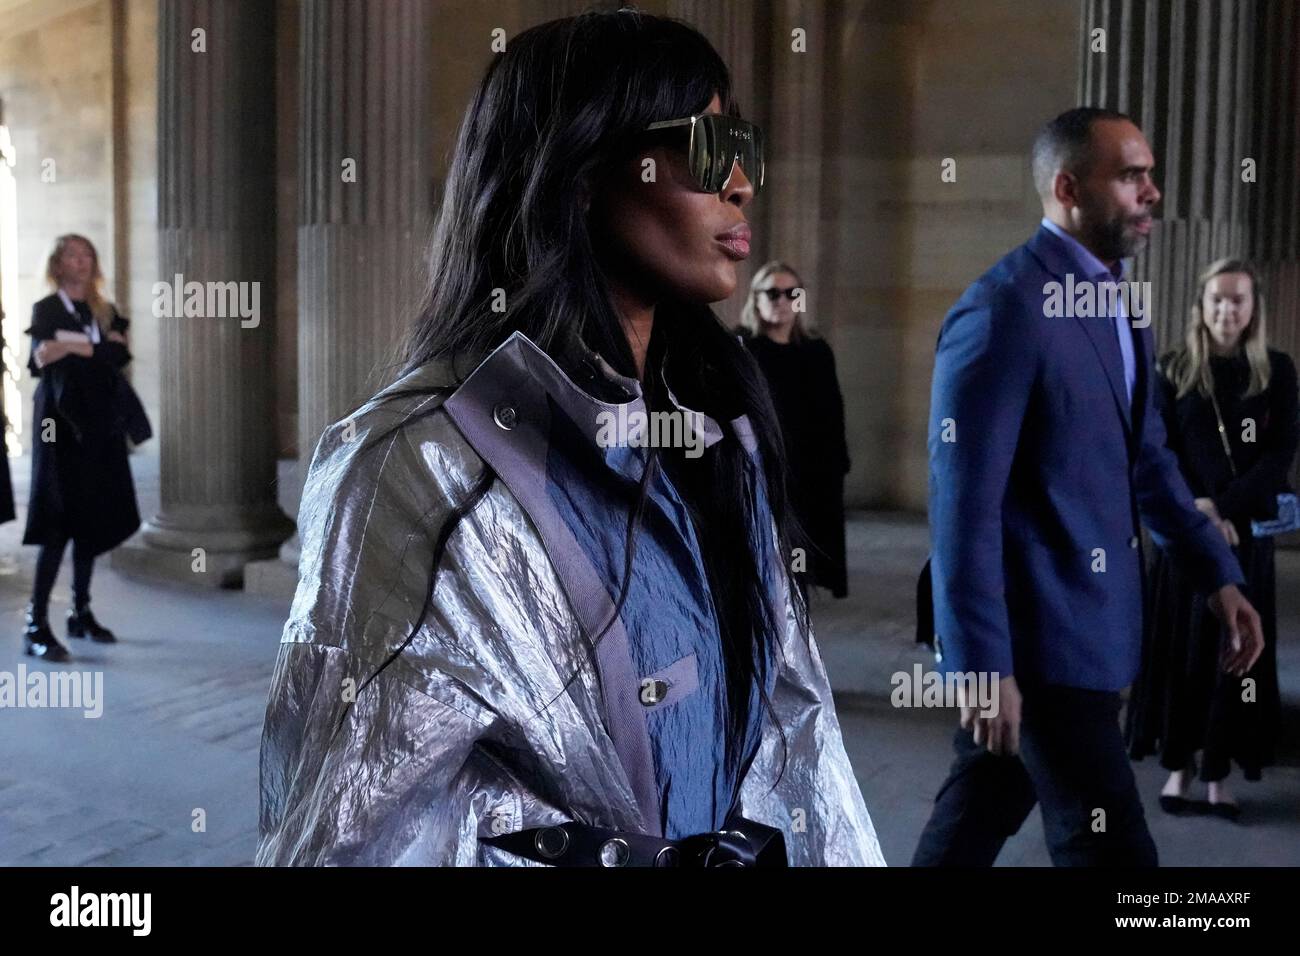 Naomi Campbell Steps Into Summer With Unbuttoned Tropical Top, Retro Shades  & Metallic Shoes for Louis Vuitton Paris Fashion Week Show